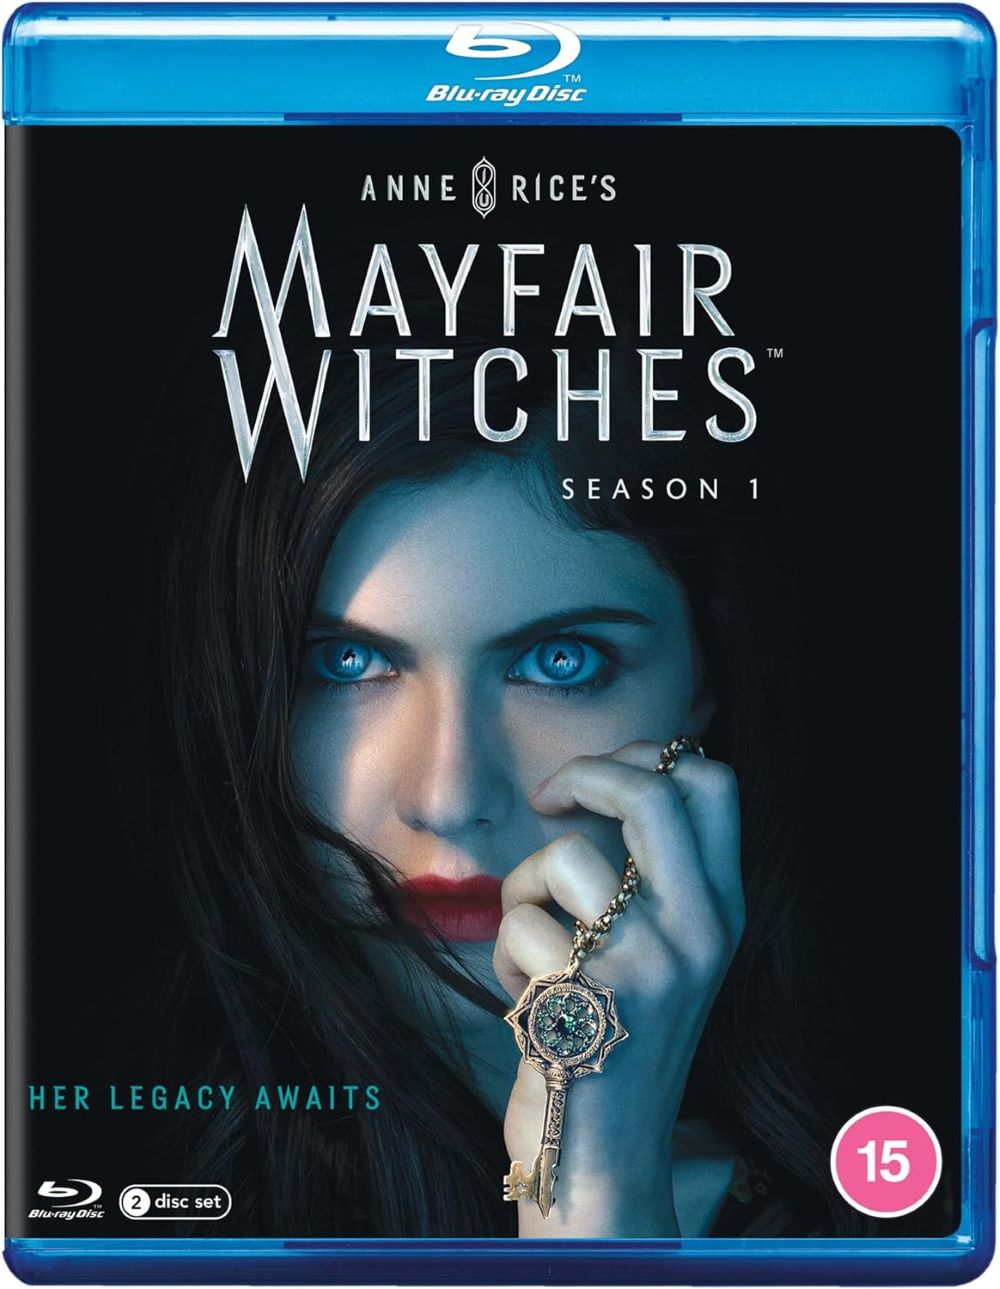 Mayfair_witches_dvd_front_cover.